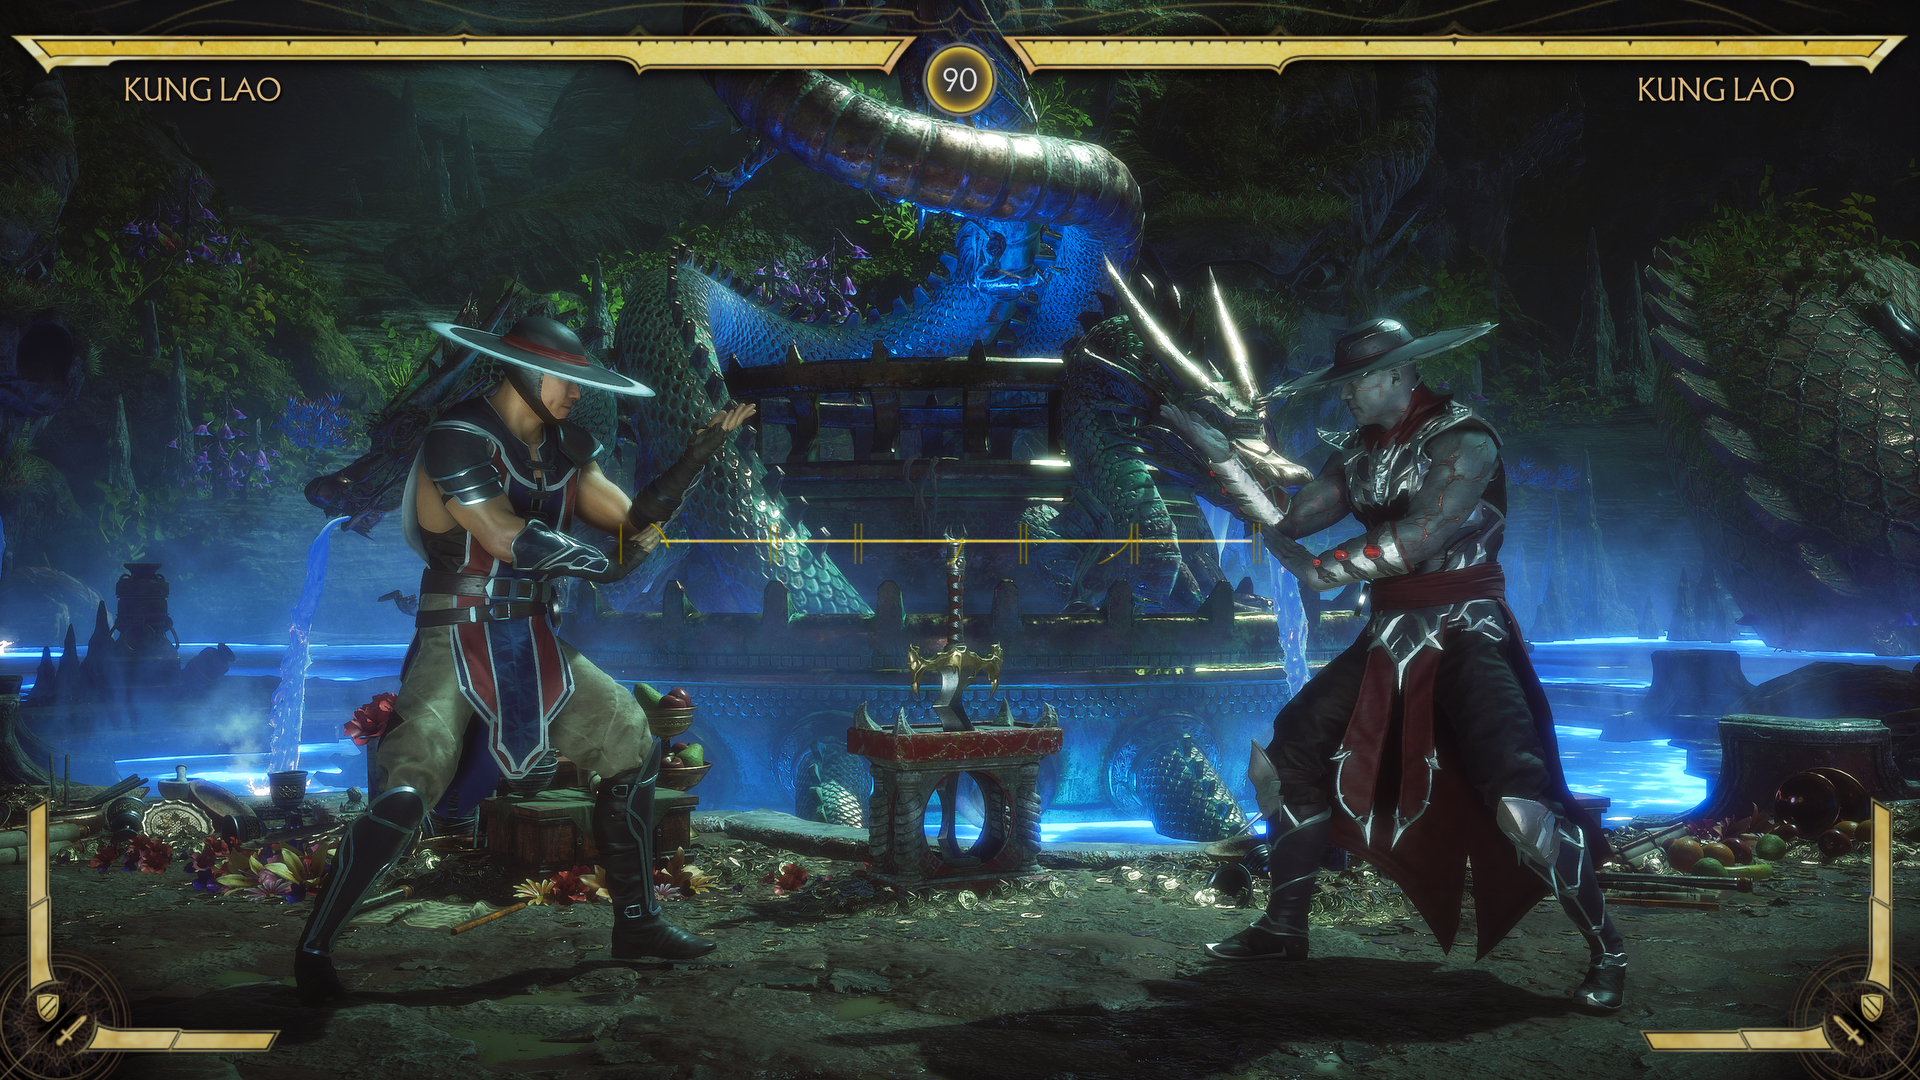 Mortal Kombat Online: Play the iconic fighting game for free on PC